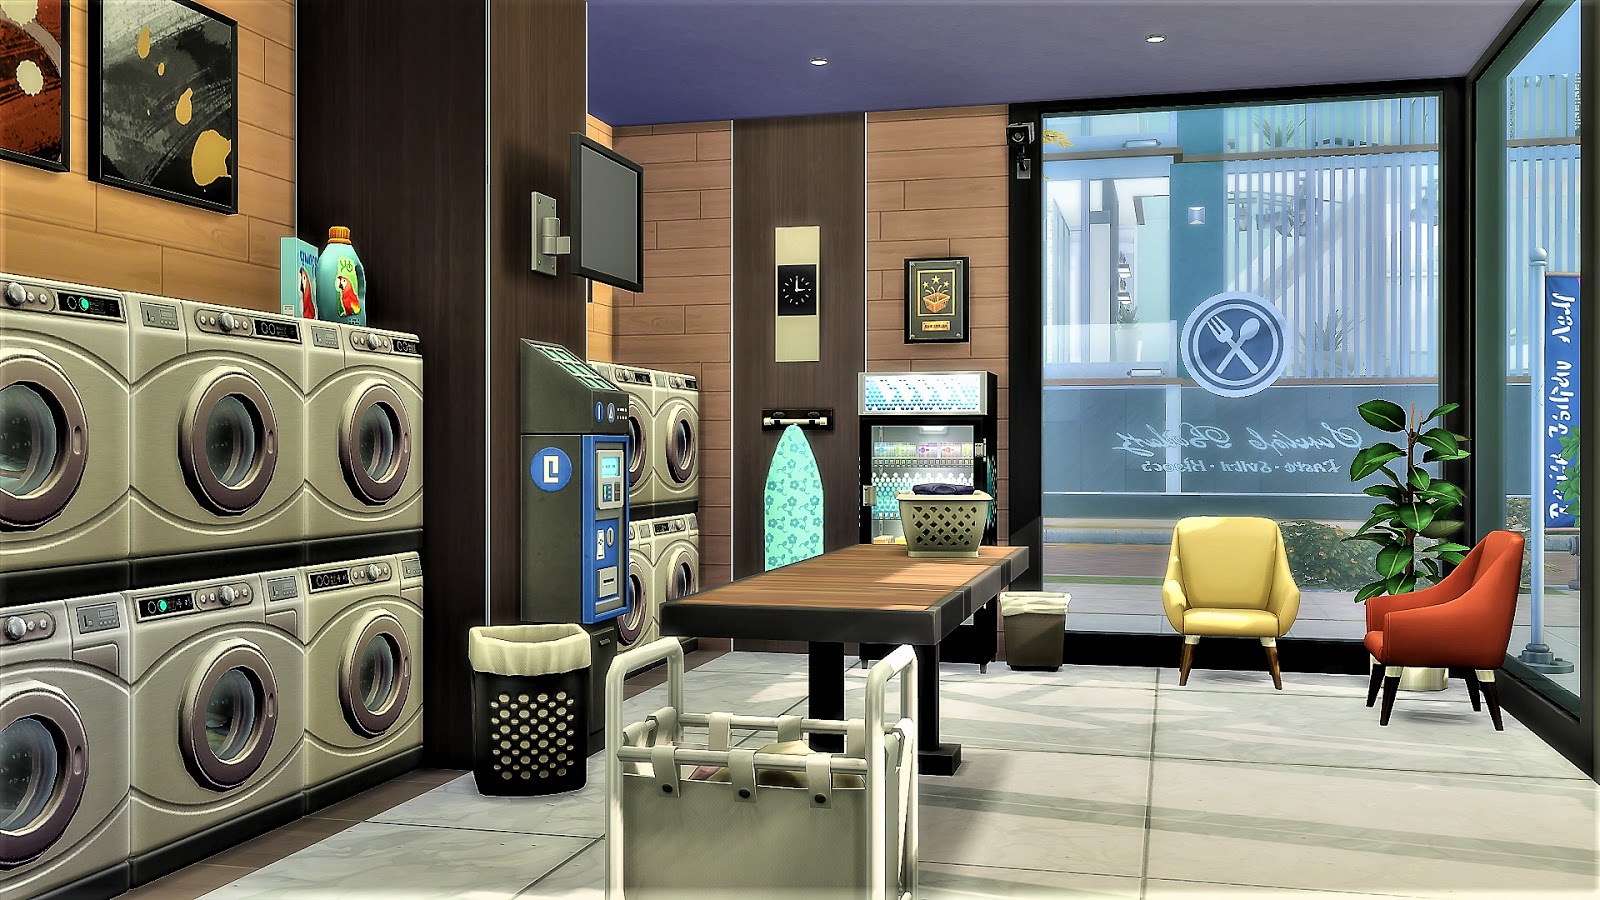 Sims 4 Coin Laundry Cafe ----- 日 式 投 币 自 助 洗 衣 店 (NO CC) .